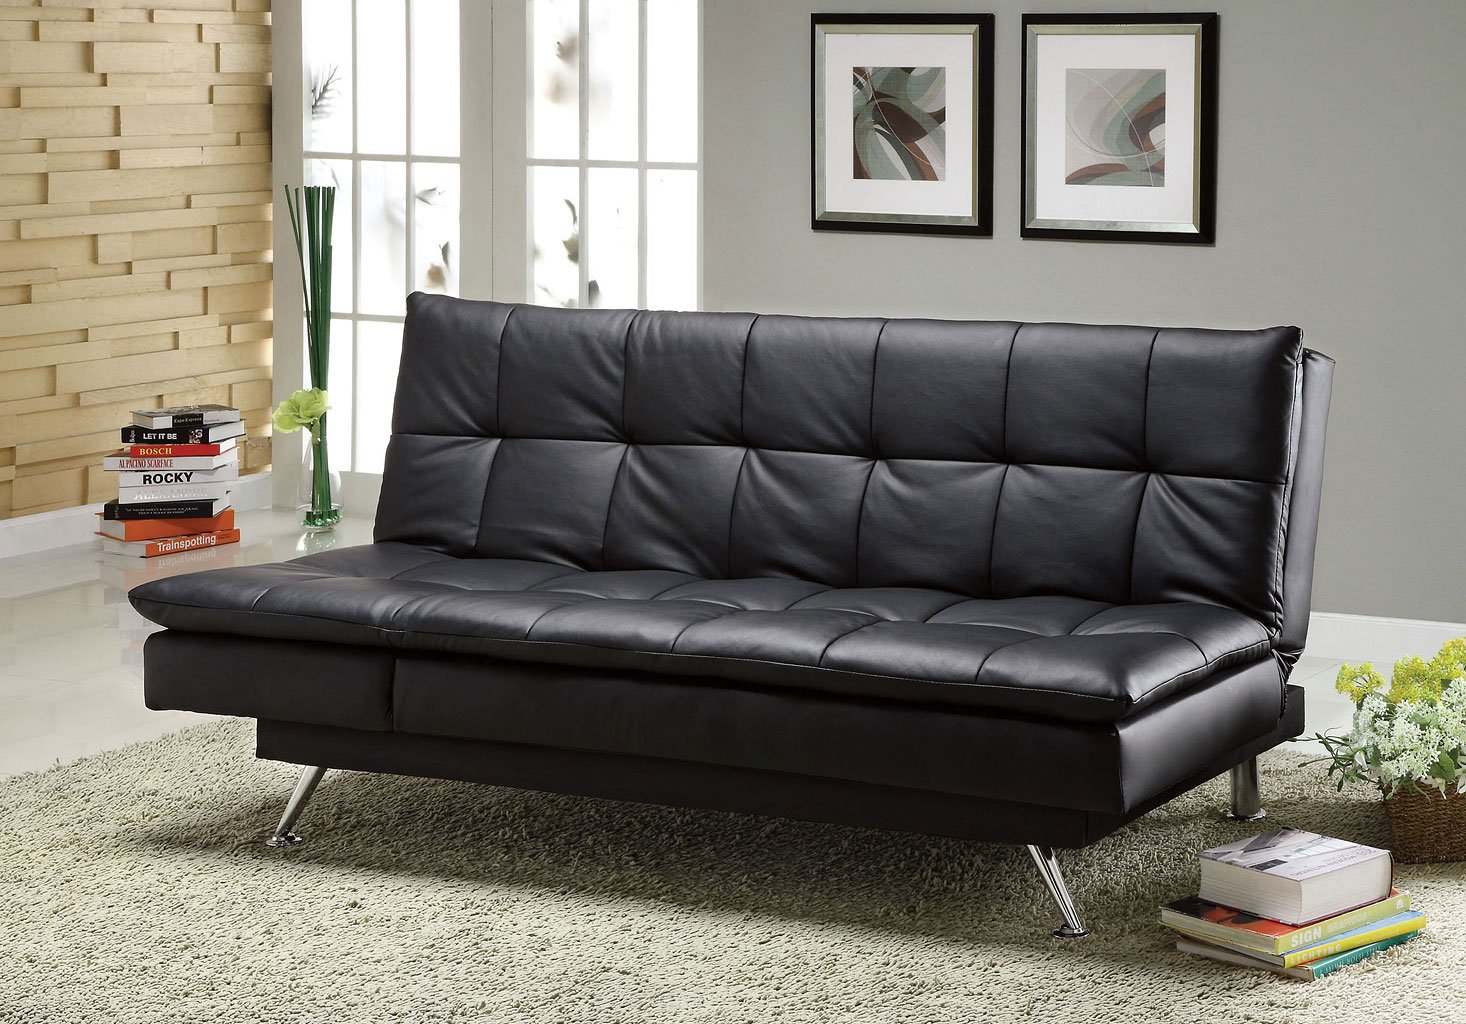 made in america sofa bed